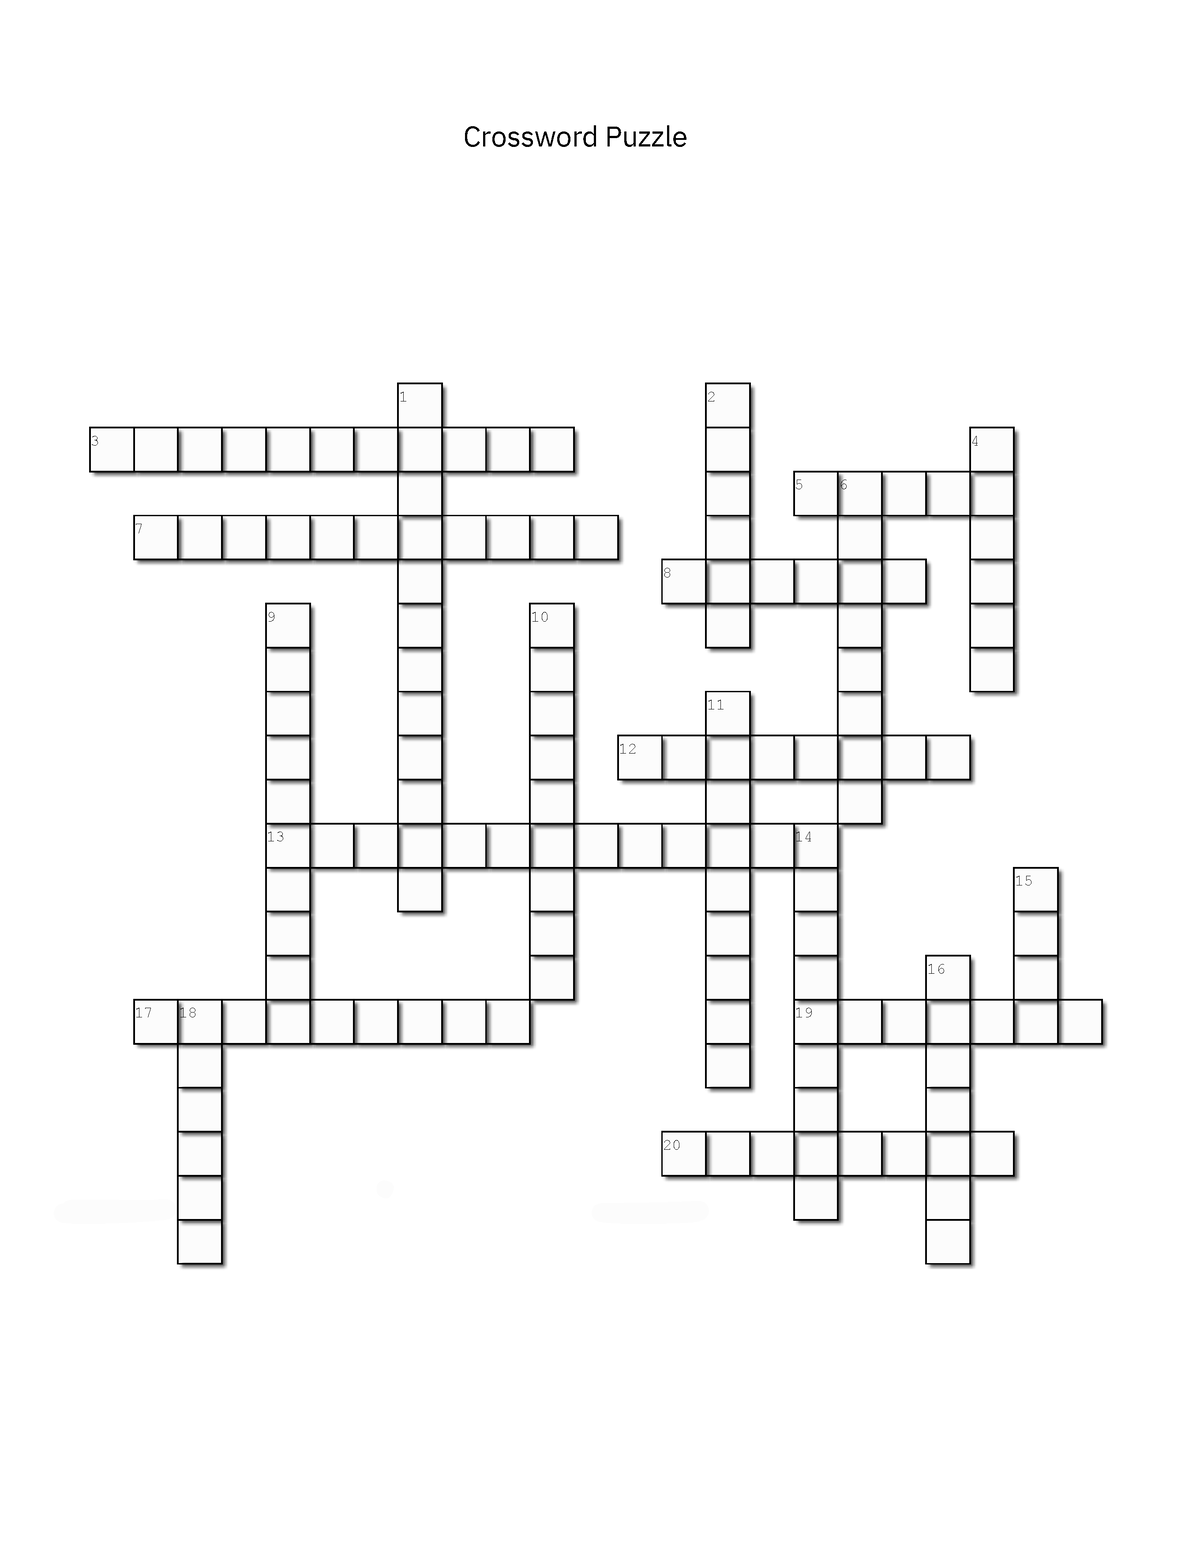 Crossword Tn9HLokuqu Crossword Puzzle Changing or converting